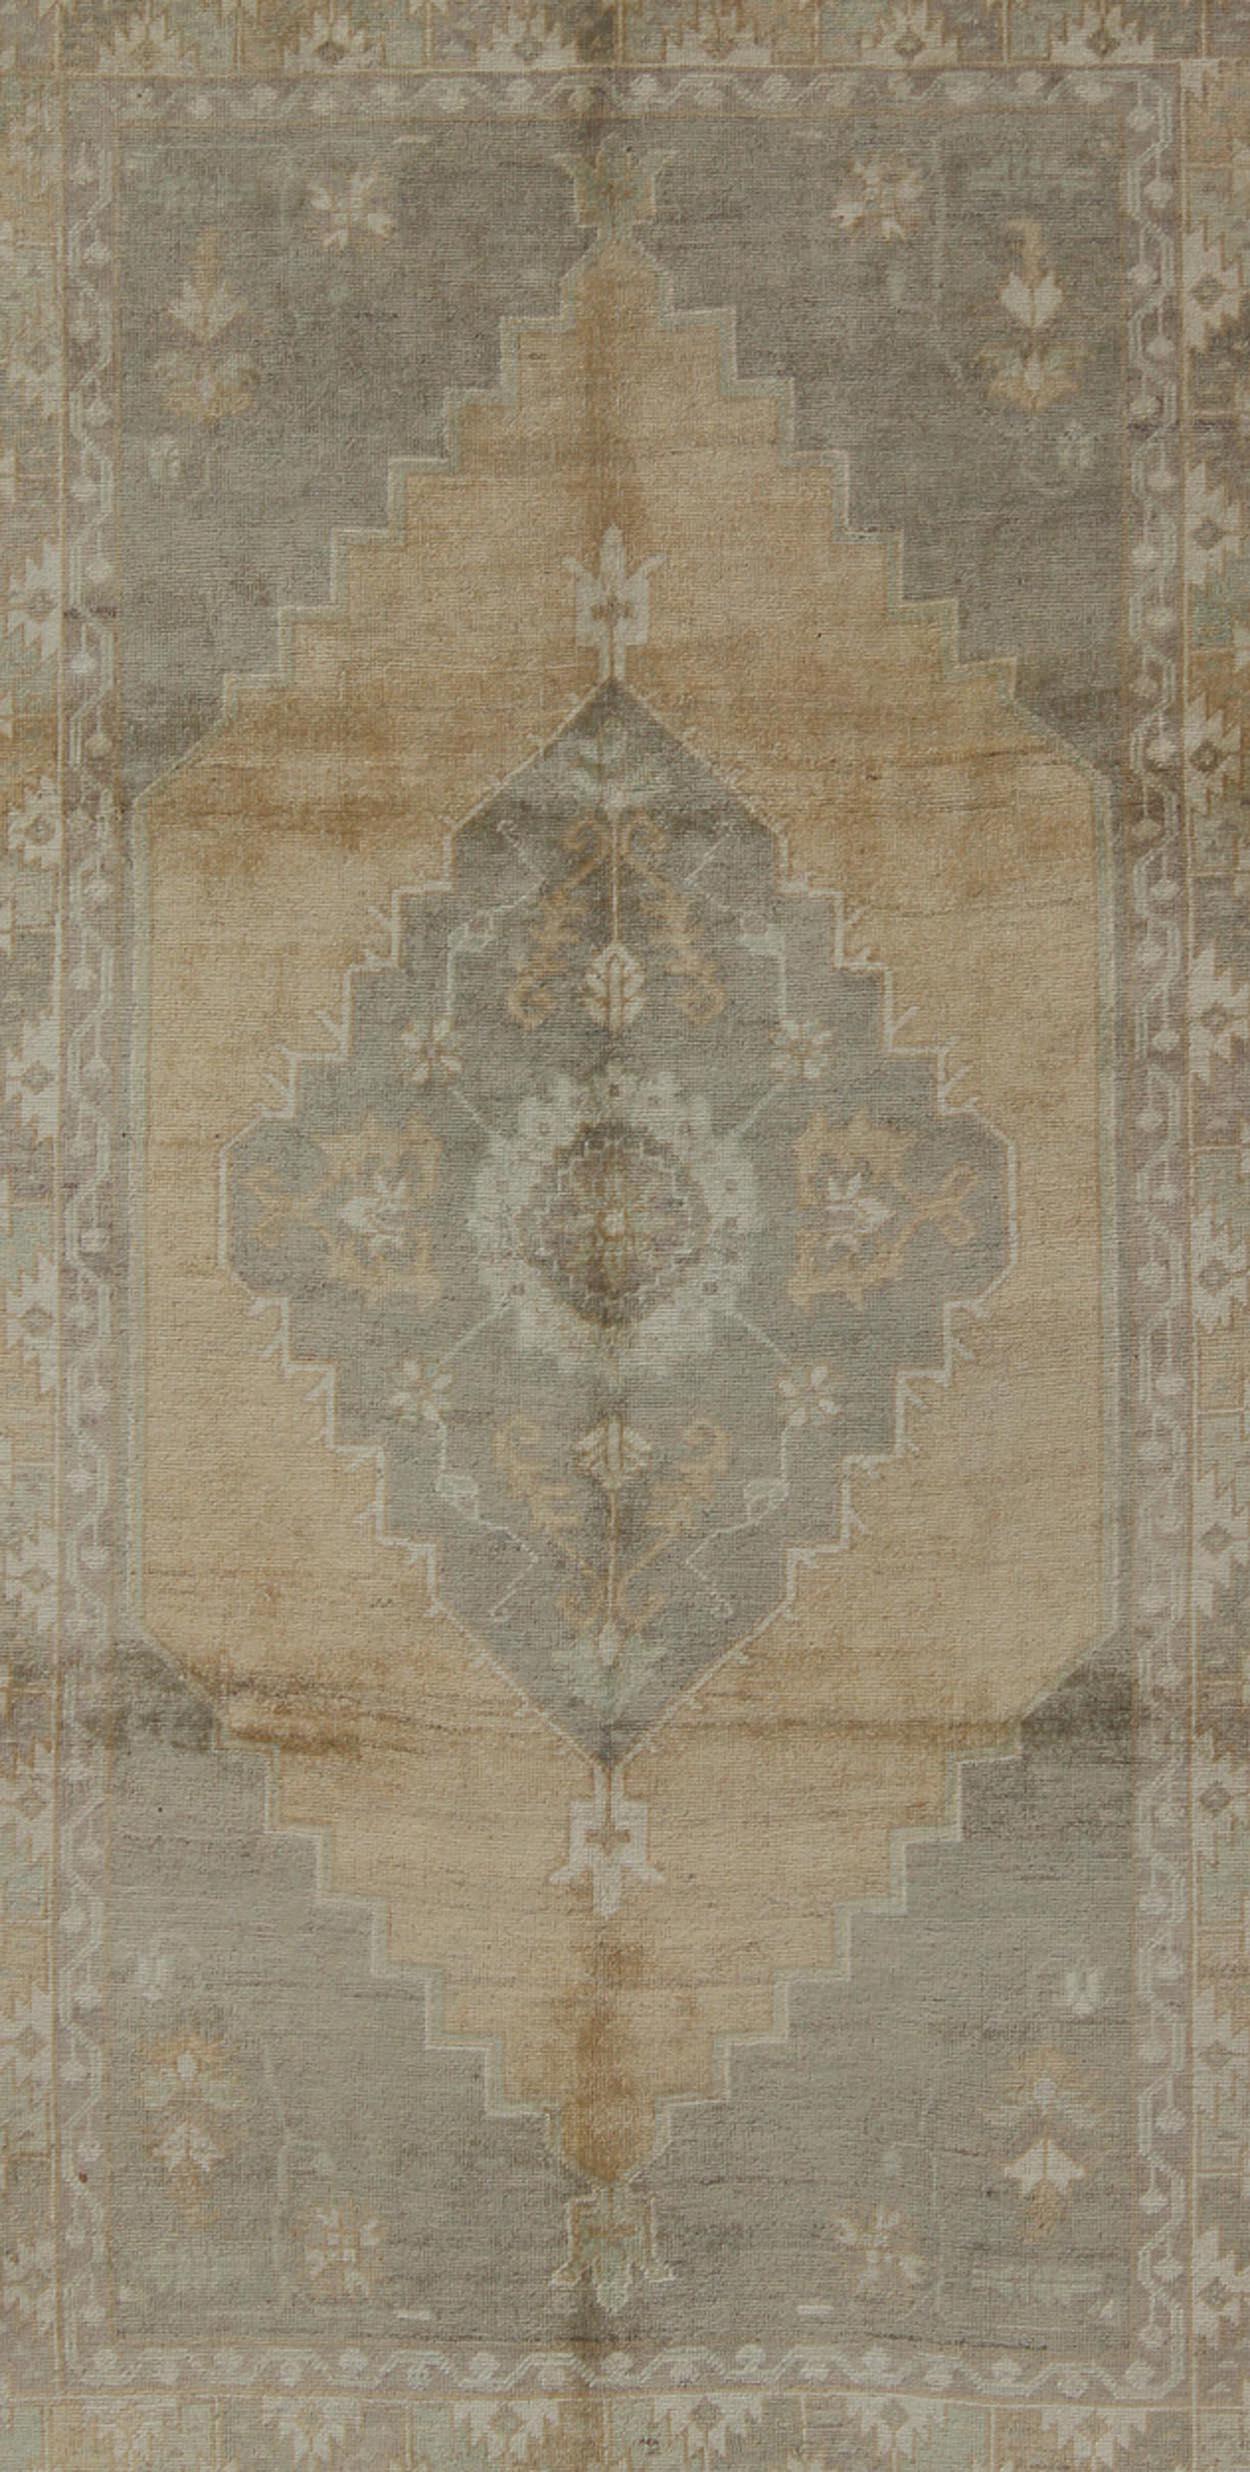 Measures: 5'5 x 9'4

This muted Turkish Oushak rests beautifully on a grounded camel-colored field. An understated medallion is well-balanced by four organic corner motifs, all characterized by the same muted colors. This piece remains elegantly